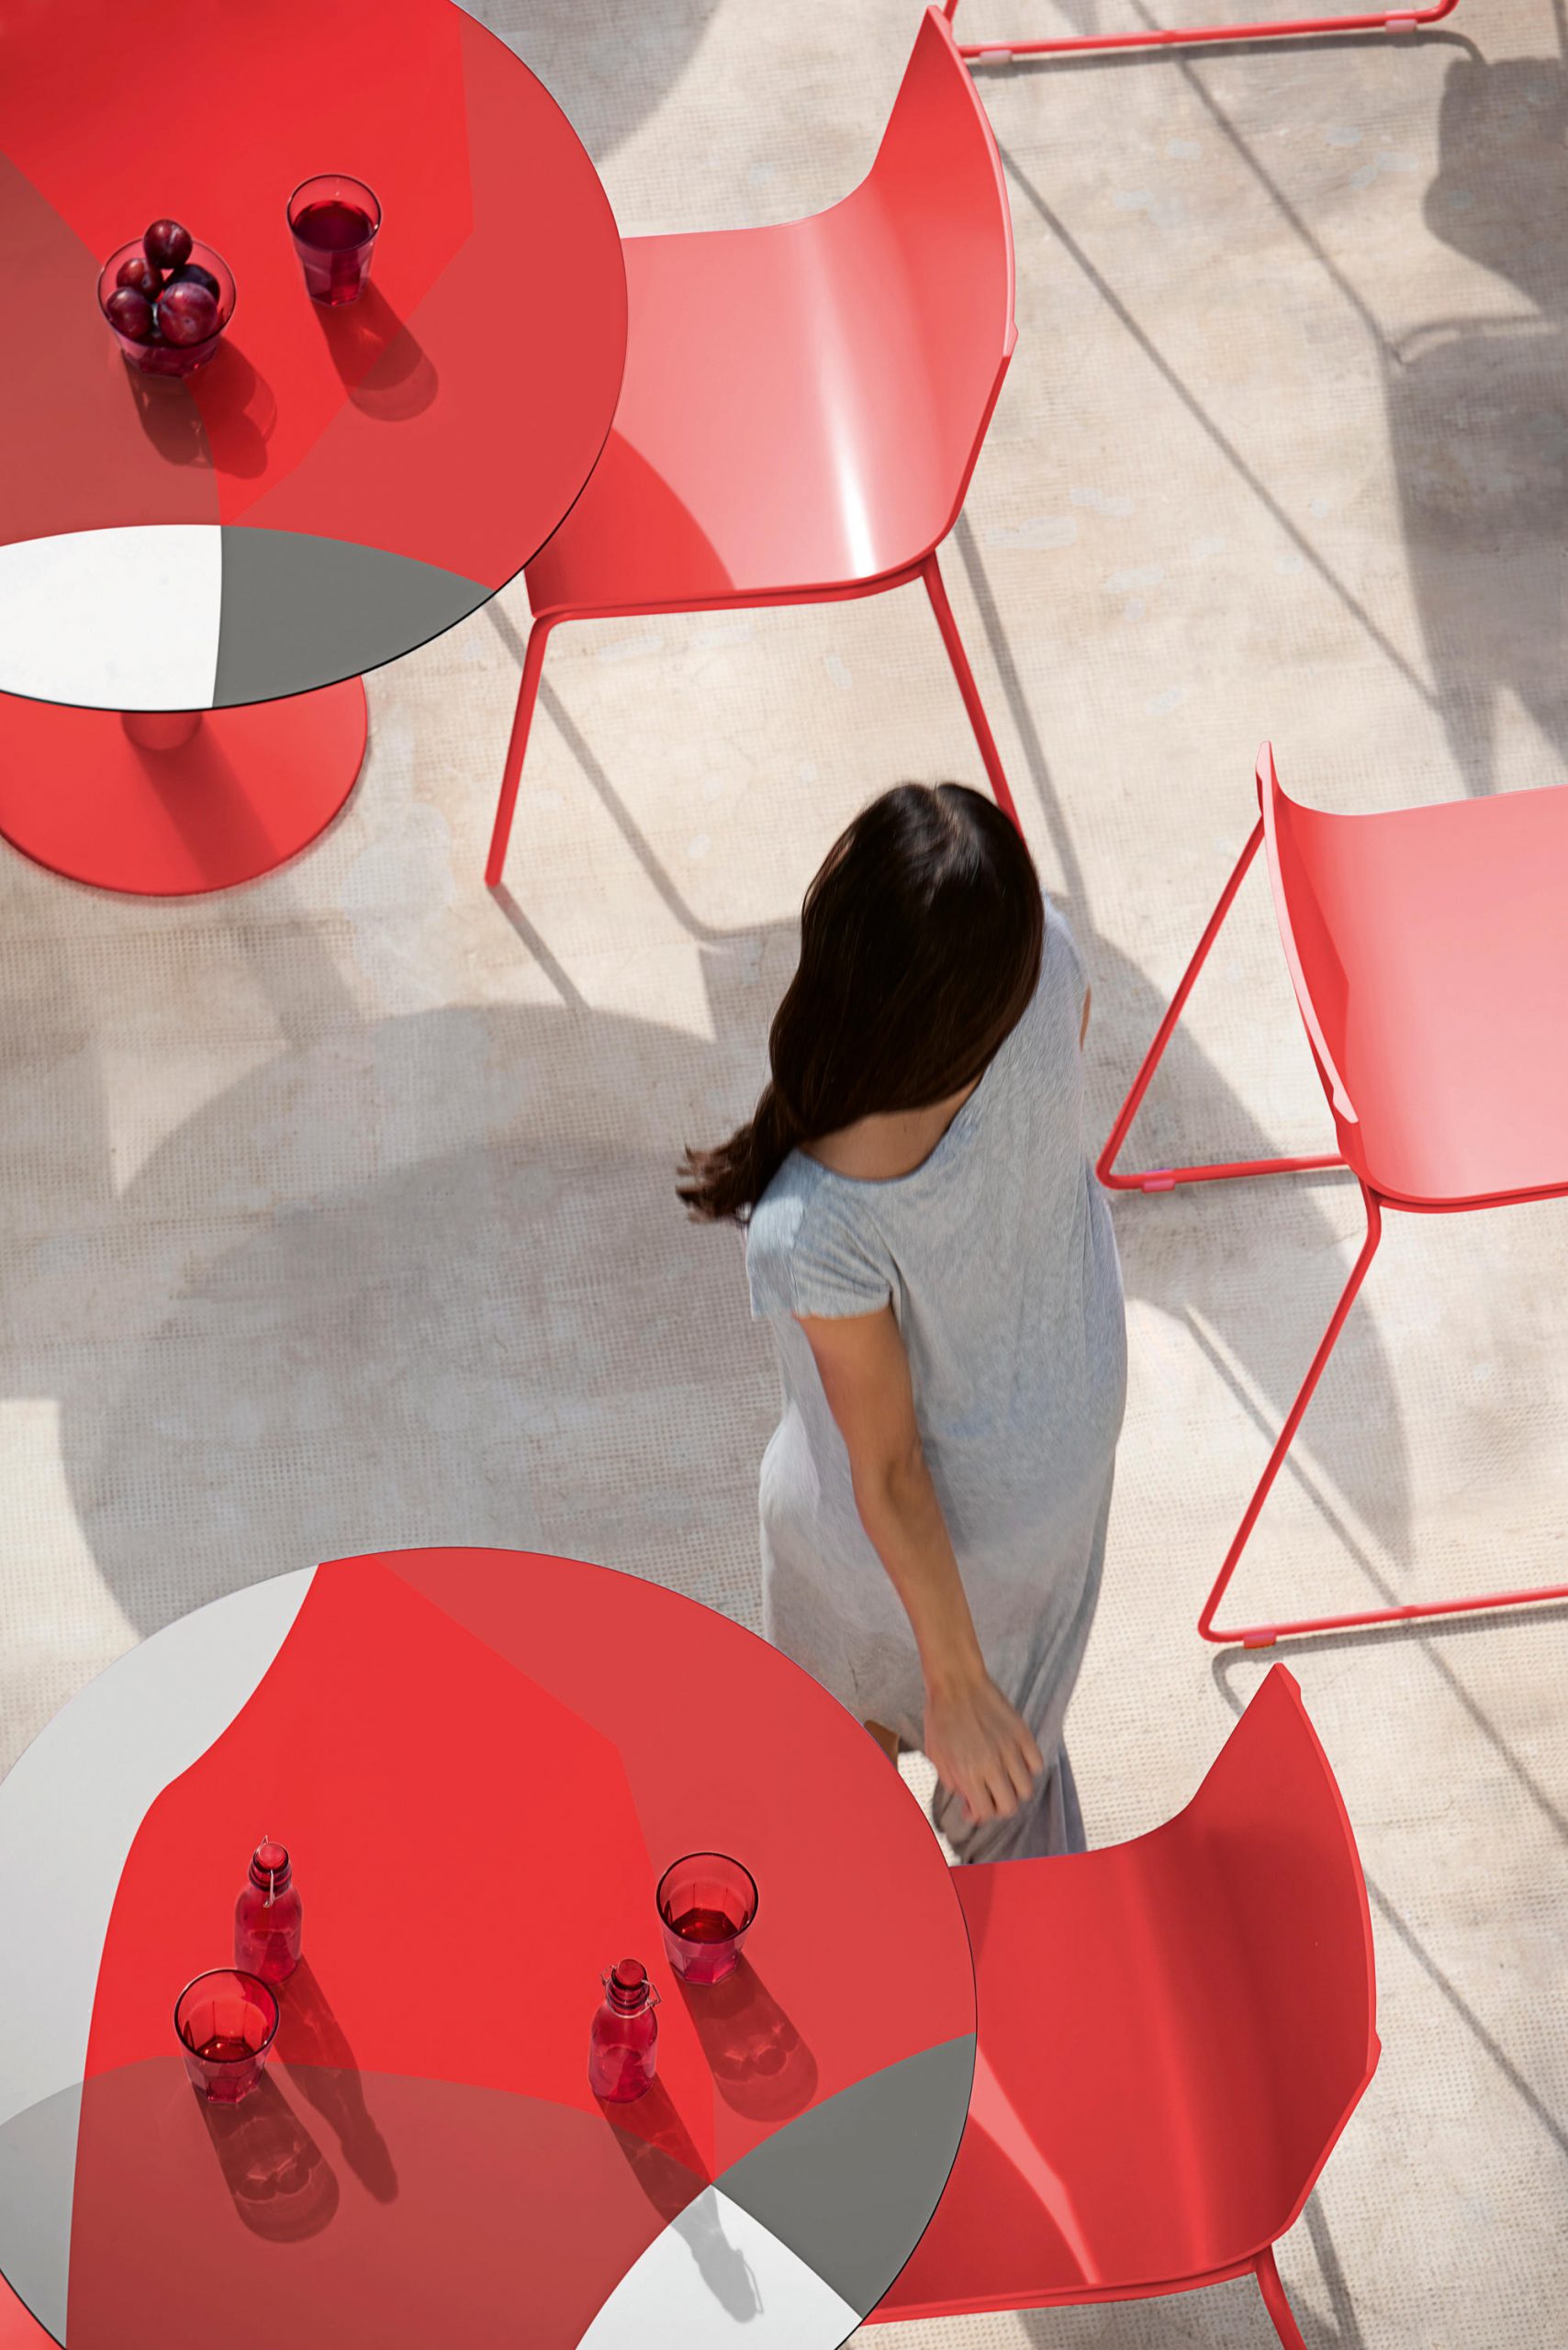 Abstrakt Mona Tables by Jonathan Lawes for Diabla